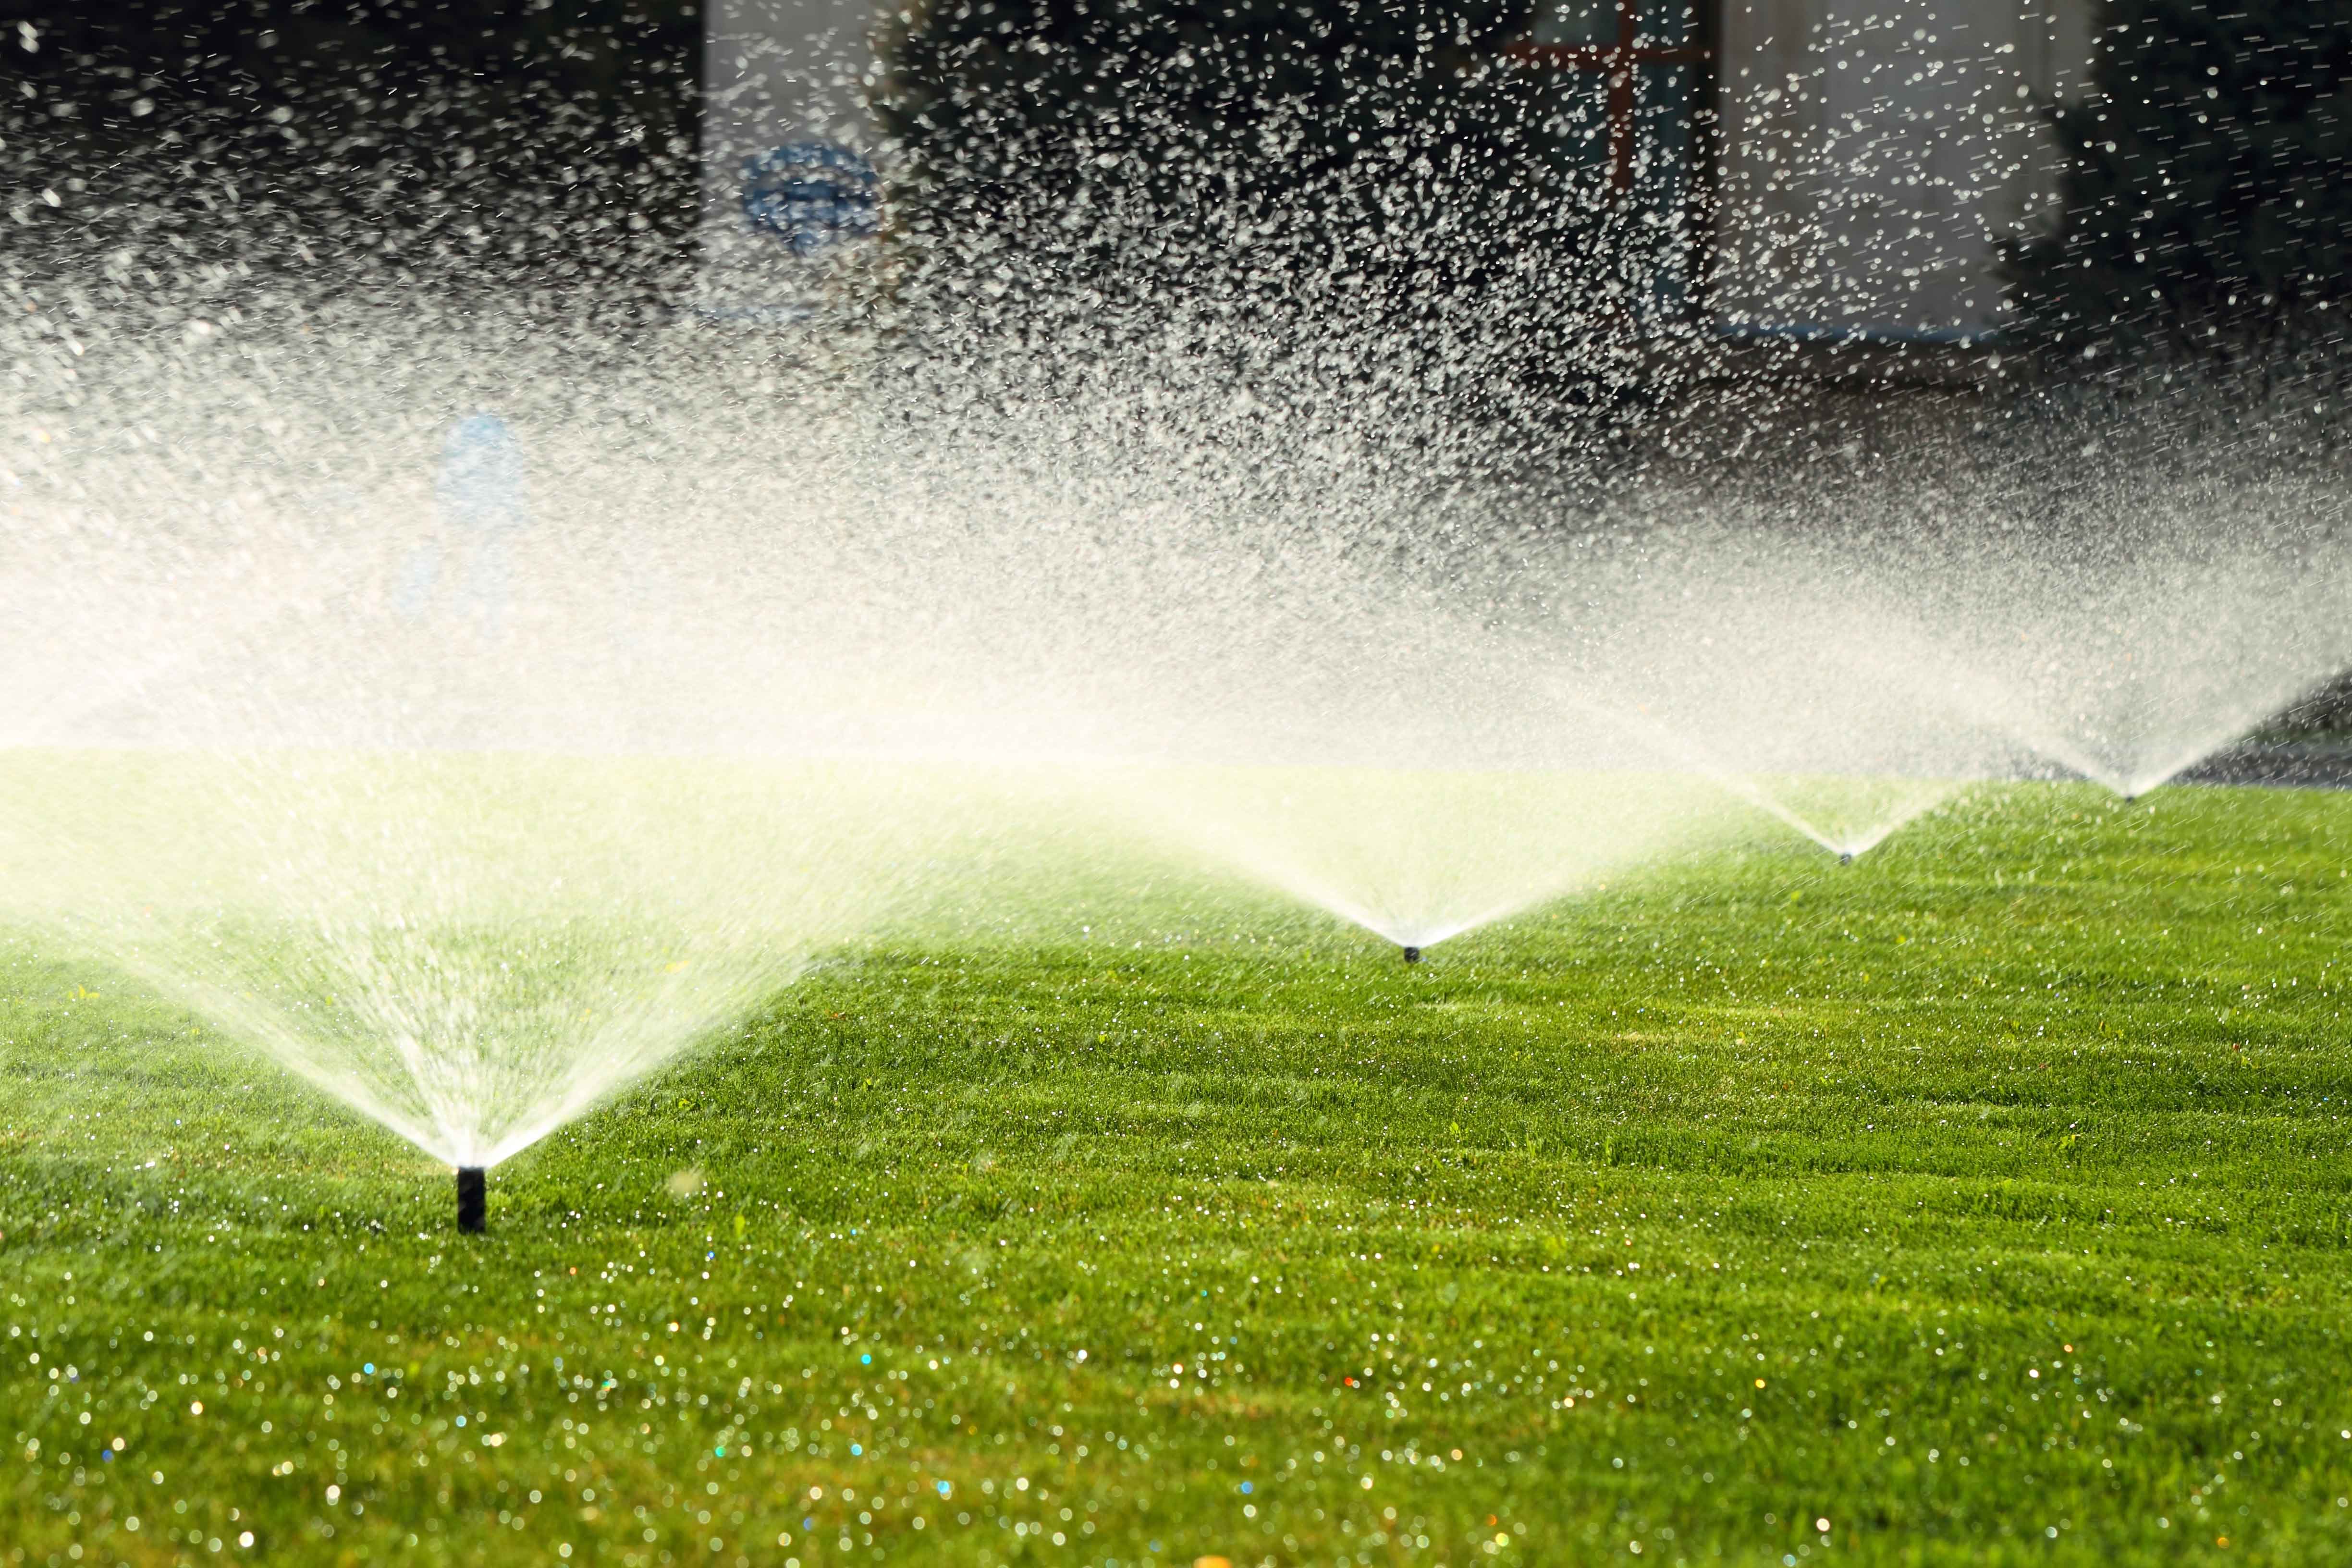 prepping-your-irrigation-system-for-winter-winterizing-your-sprinkler